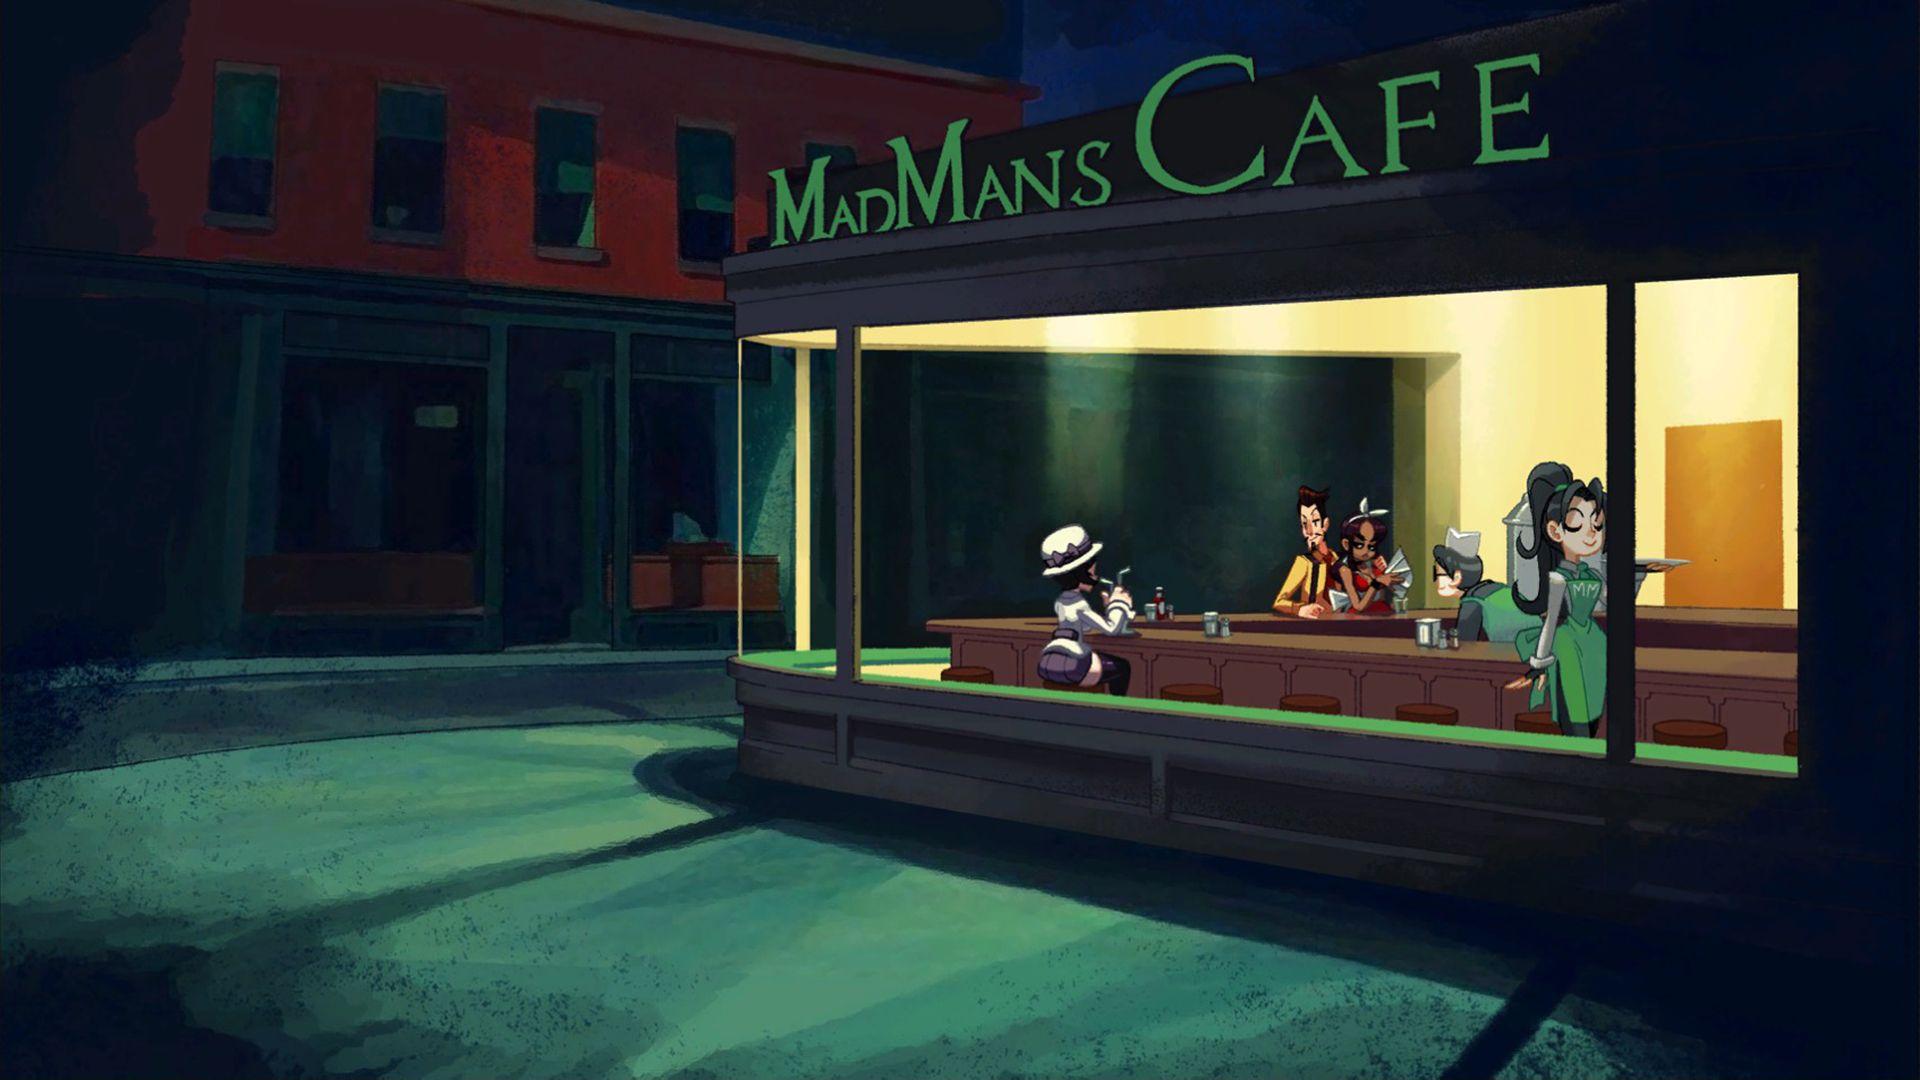 Nighthawks By Edward Hopper (1942) This Has Been My Go To